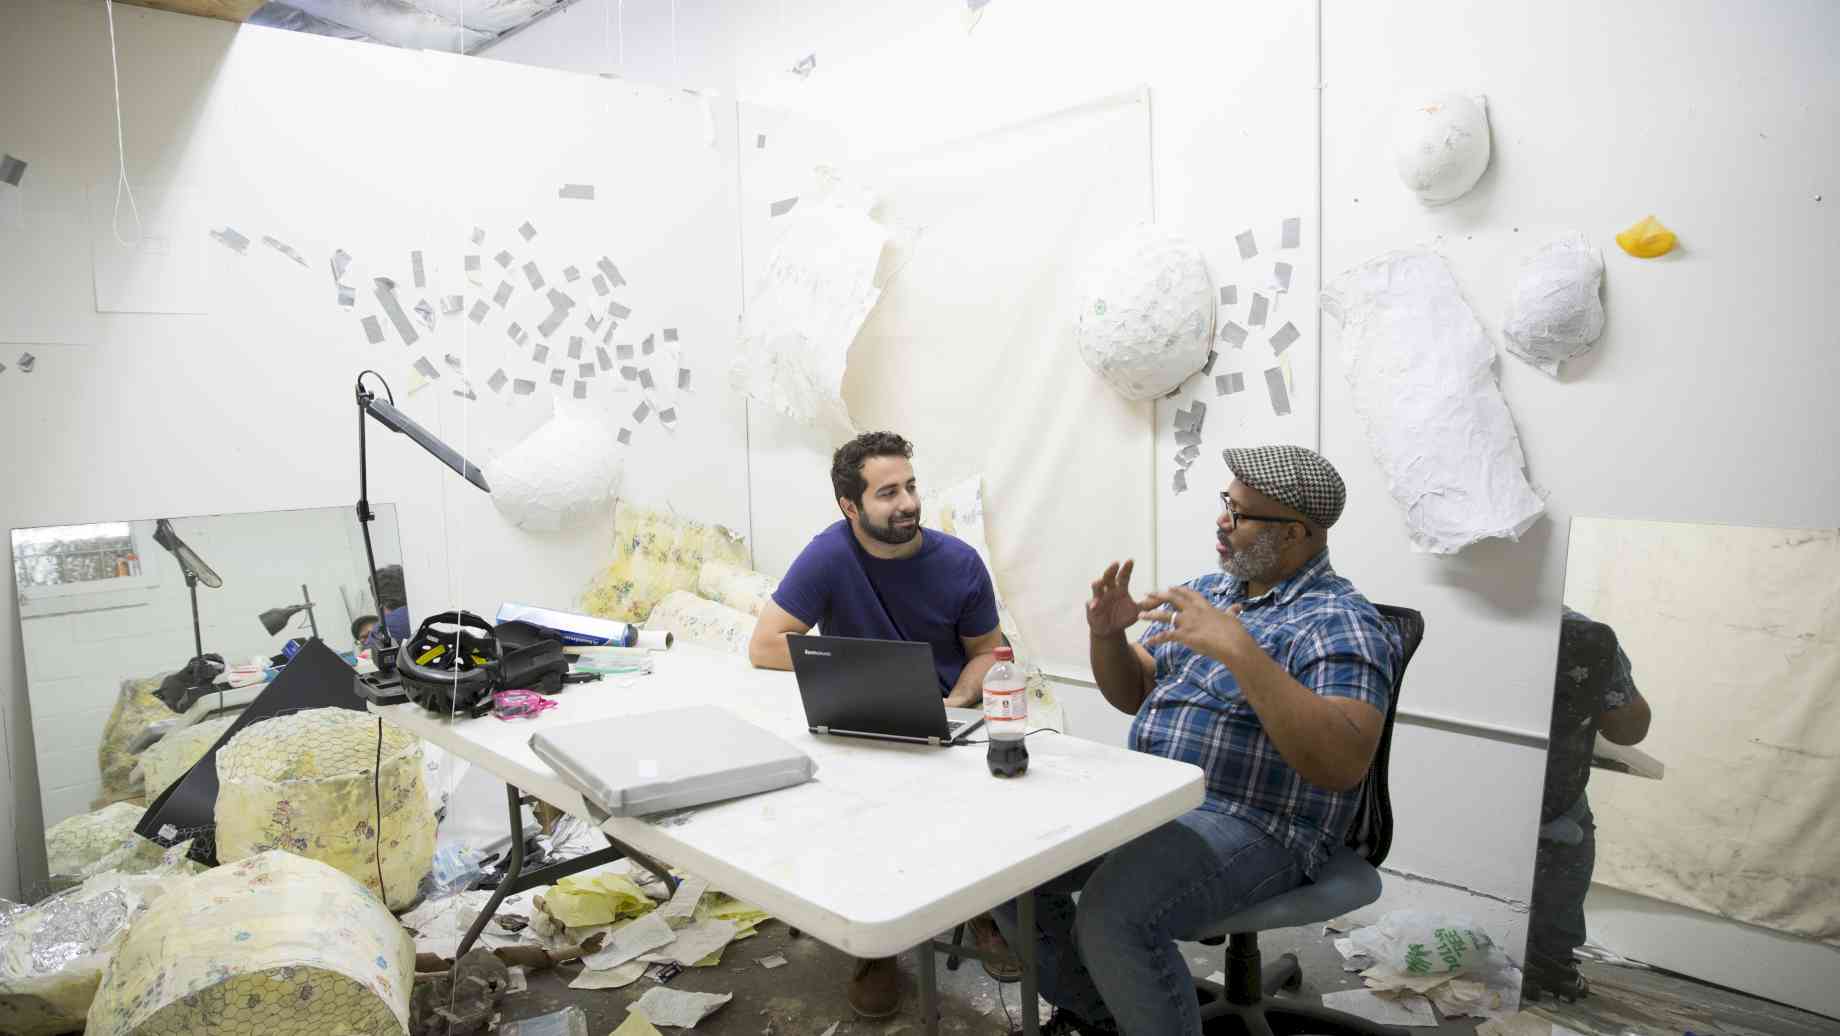 Visiting Artist Trent Doyle Hancock (right) conducts a studio visit with Art + Tech grad student Chris Bianchi